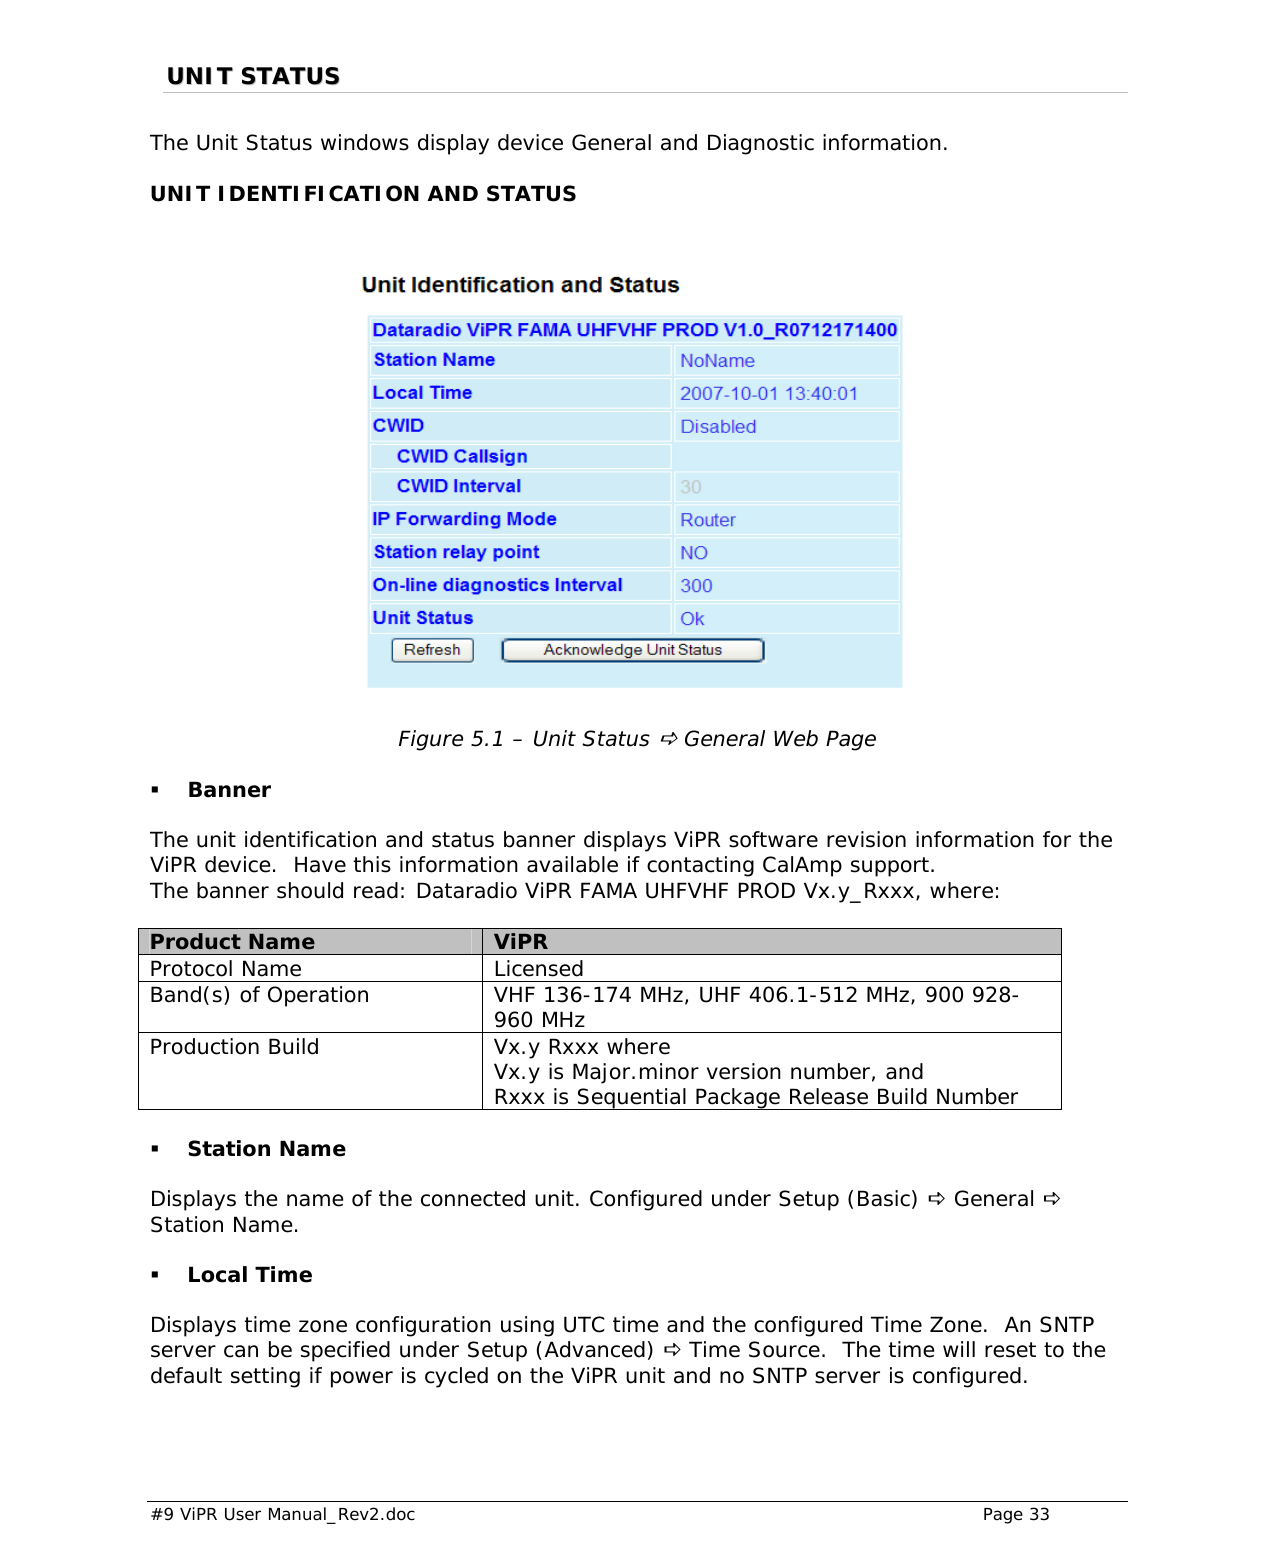  #9 ViPR User Manual_Rev2.doc    Page 33  UUNNIITT  SSTTAATTUUSS  The Unit Status windows display device General and Diagnostic information.  UNIT IDENTIFICATION AND STATUS   Figure 5.1 – Unit Status D General Web Page  Banner The unit identification and status banner displays ViPR software revision information for the ViPR device.  Have this information available if contacting CalAmp support.  The banner should read: Dataradio ViPR FAMA UHFVHF PROD Vx.y_Rxxx, where:  Product Name  ViPR Protocol Name  Licensed Band(s) of Operation  VHF 136-174 MHz, UHF 406.1-512 MHz, 900 928-960 MHz Production Build  Vx.y Rxxx where  Vx.y is Major.minor version number, and  Rxxx is Sequential Package Release Build Number  Station Name Displays the name of the connected unit. Configured under Setup (Basic) D General D Station Name.     Local Time  Displays time zone configuration using UTC time and the configured Time Zone.  An SNTP server can be specified under Setup (Advanced) D Time Source.  The time will reset to the default setting if power is cycled on the ViPR unit and no SNTP server is configured. 